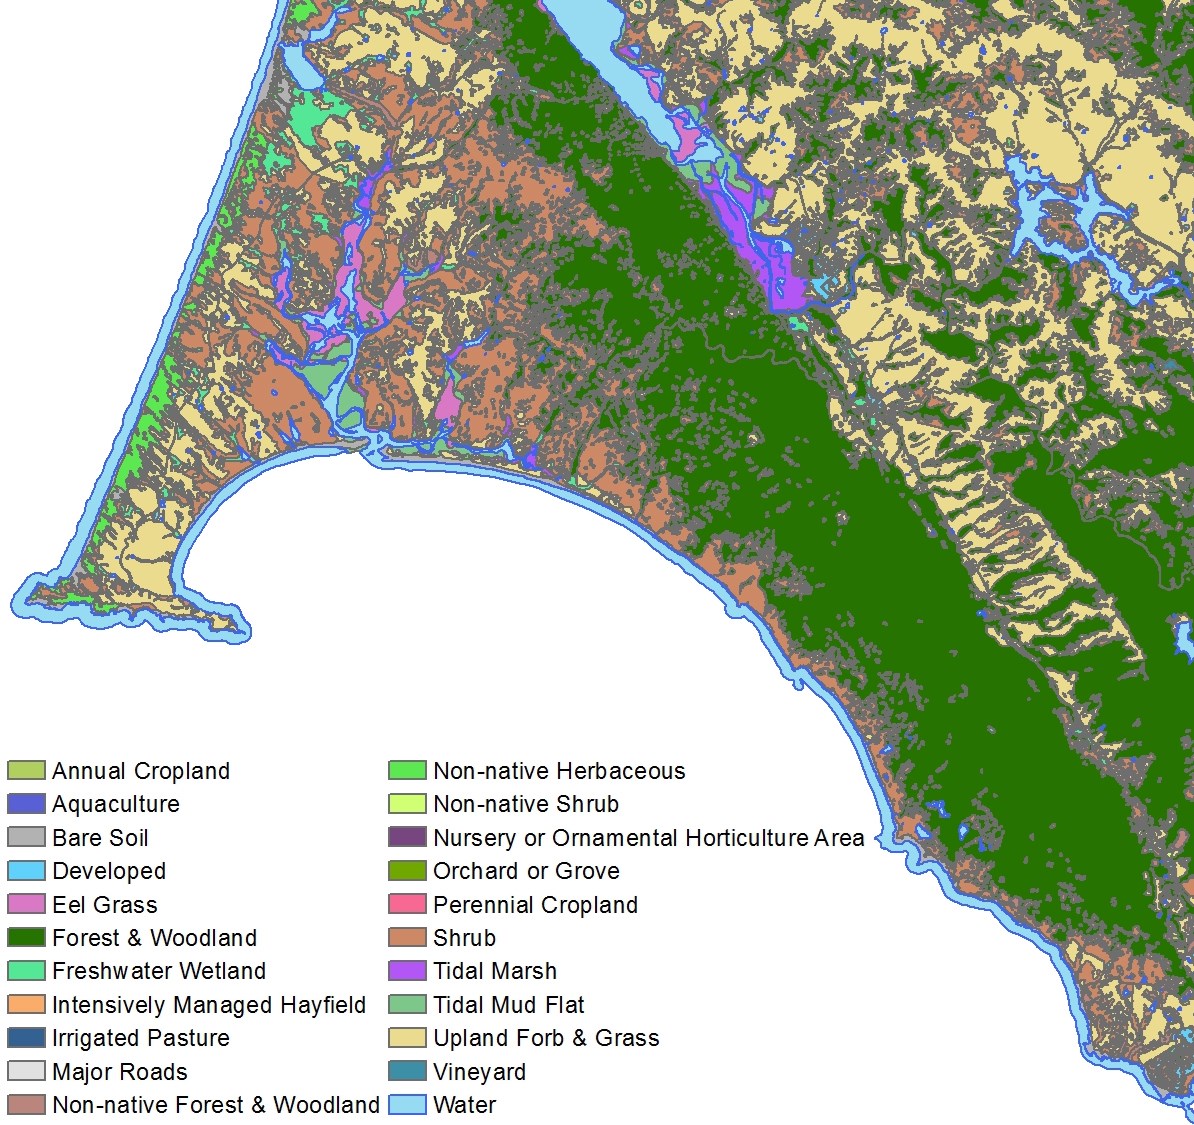 Map focused on Point Reyes National Seashore showing many different colors, each representing different land cover and lifeform classes.